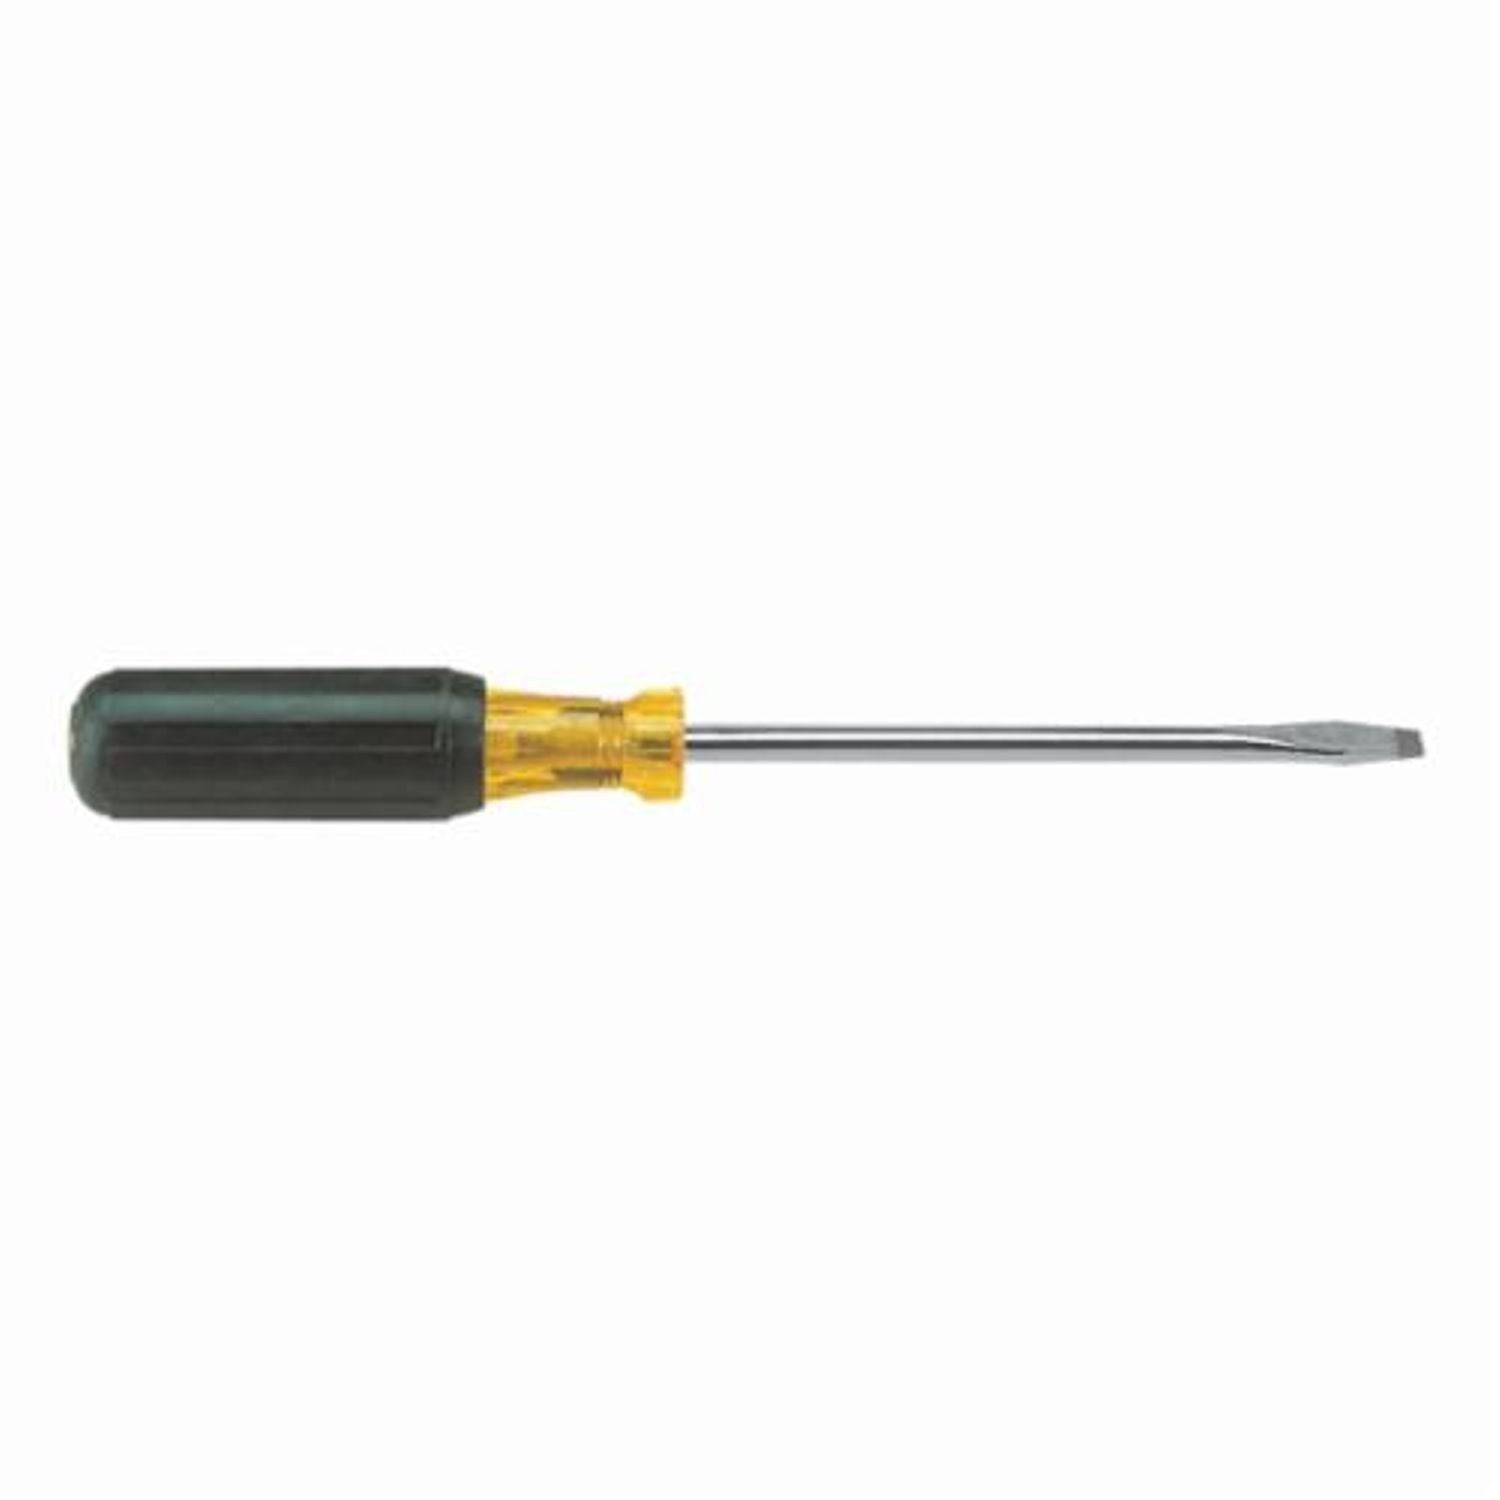 Armstrong 66-507 3/8" x 8" Round Shank Slotted Screwdriver Rubber Grip USA